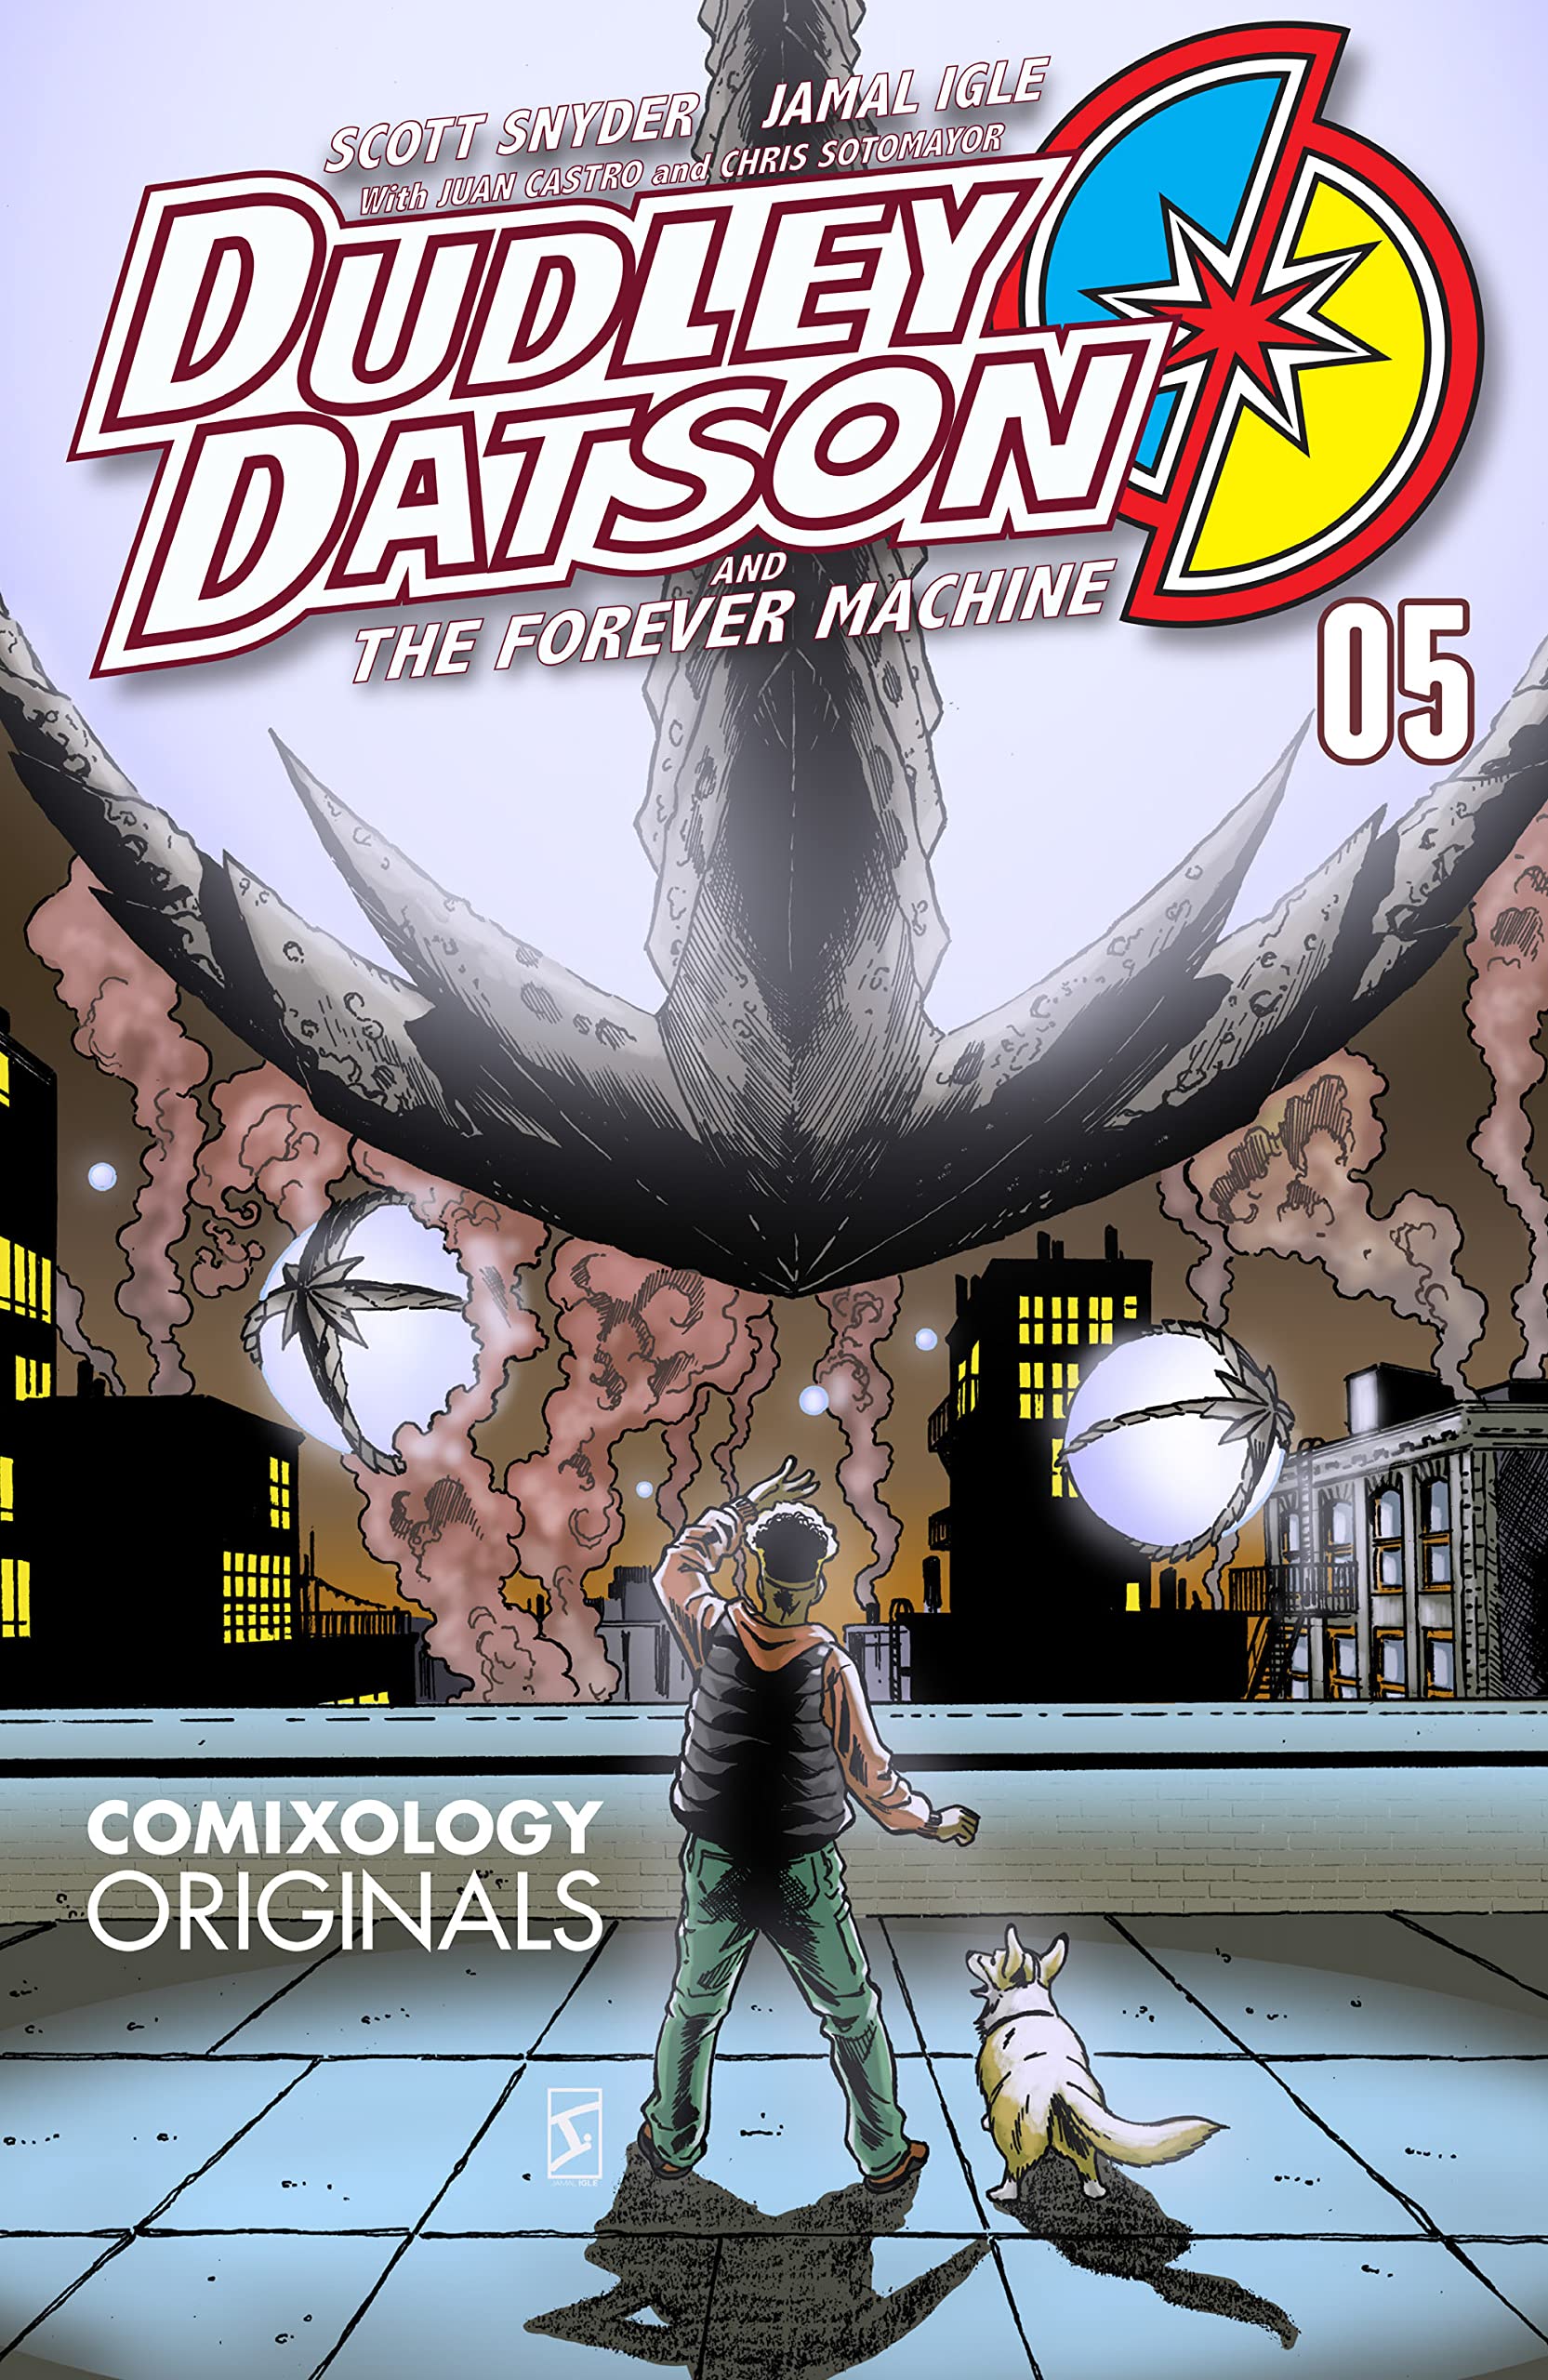 Read online Dudley Datson and the Forever Machine comic -  Issue #5 - 1